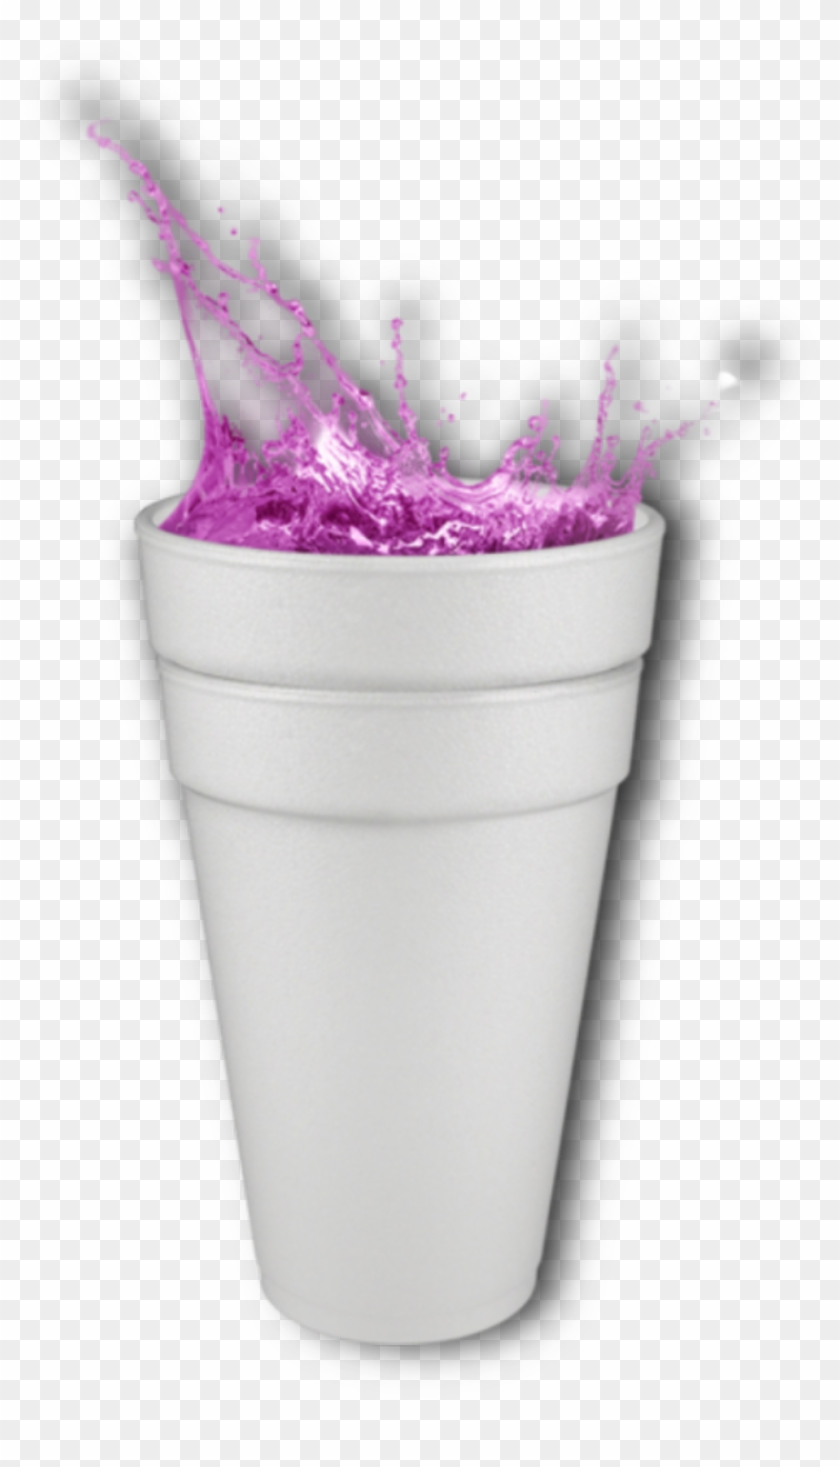 #styrofoam #cup #drink #glass #liquid #pink #food #aesthetic Clipart #1973365